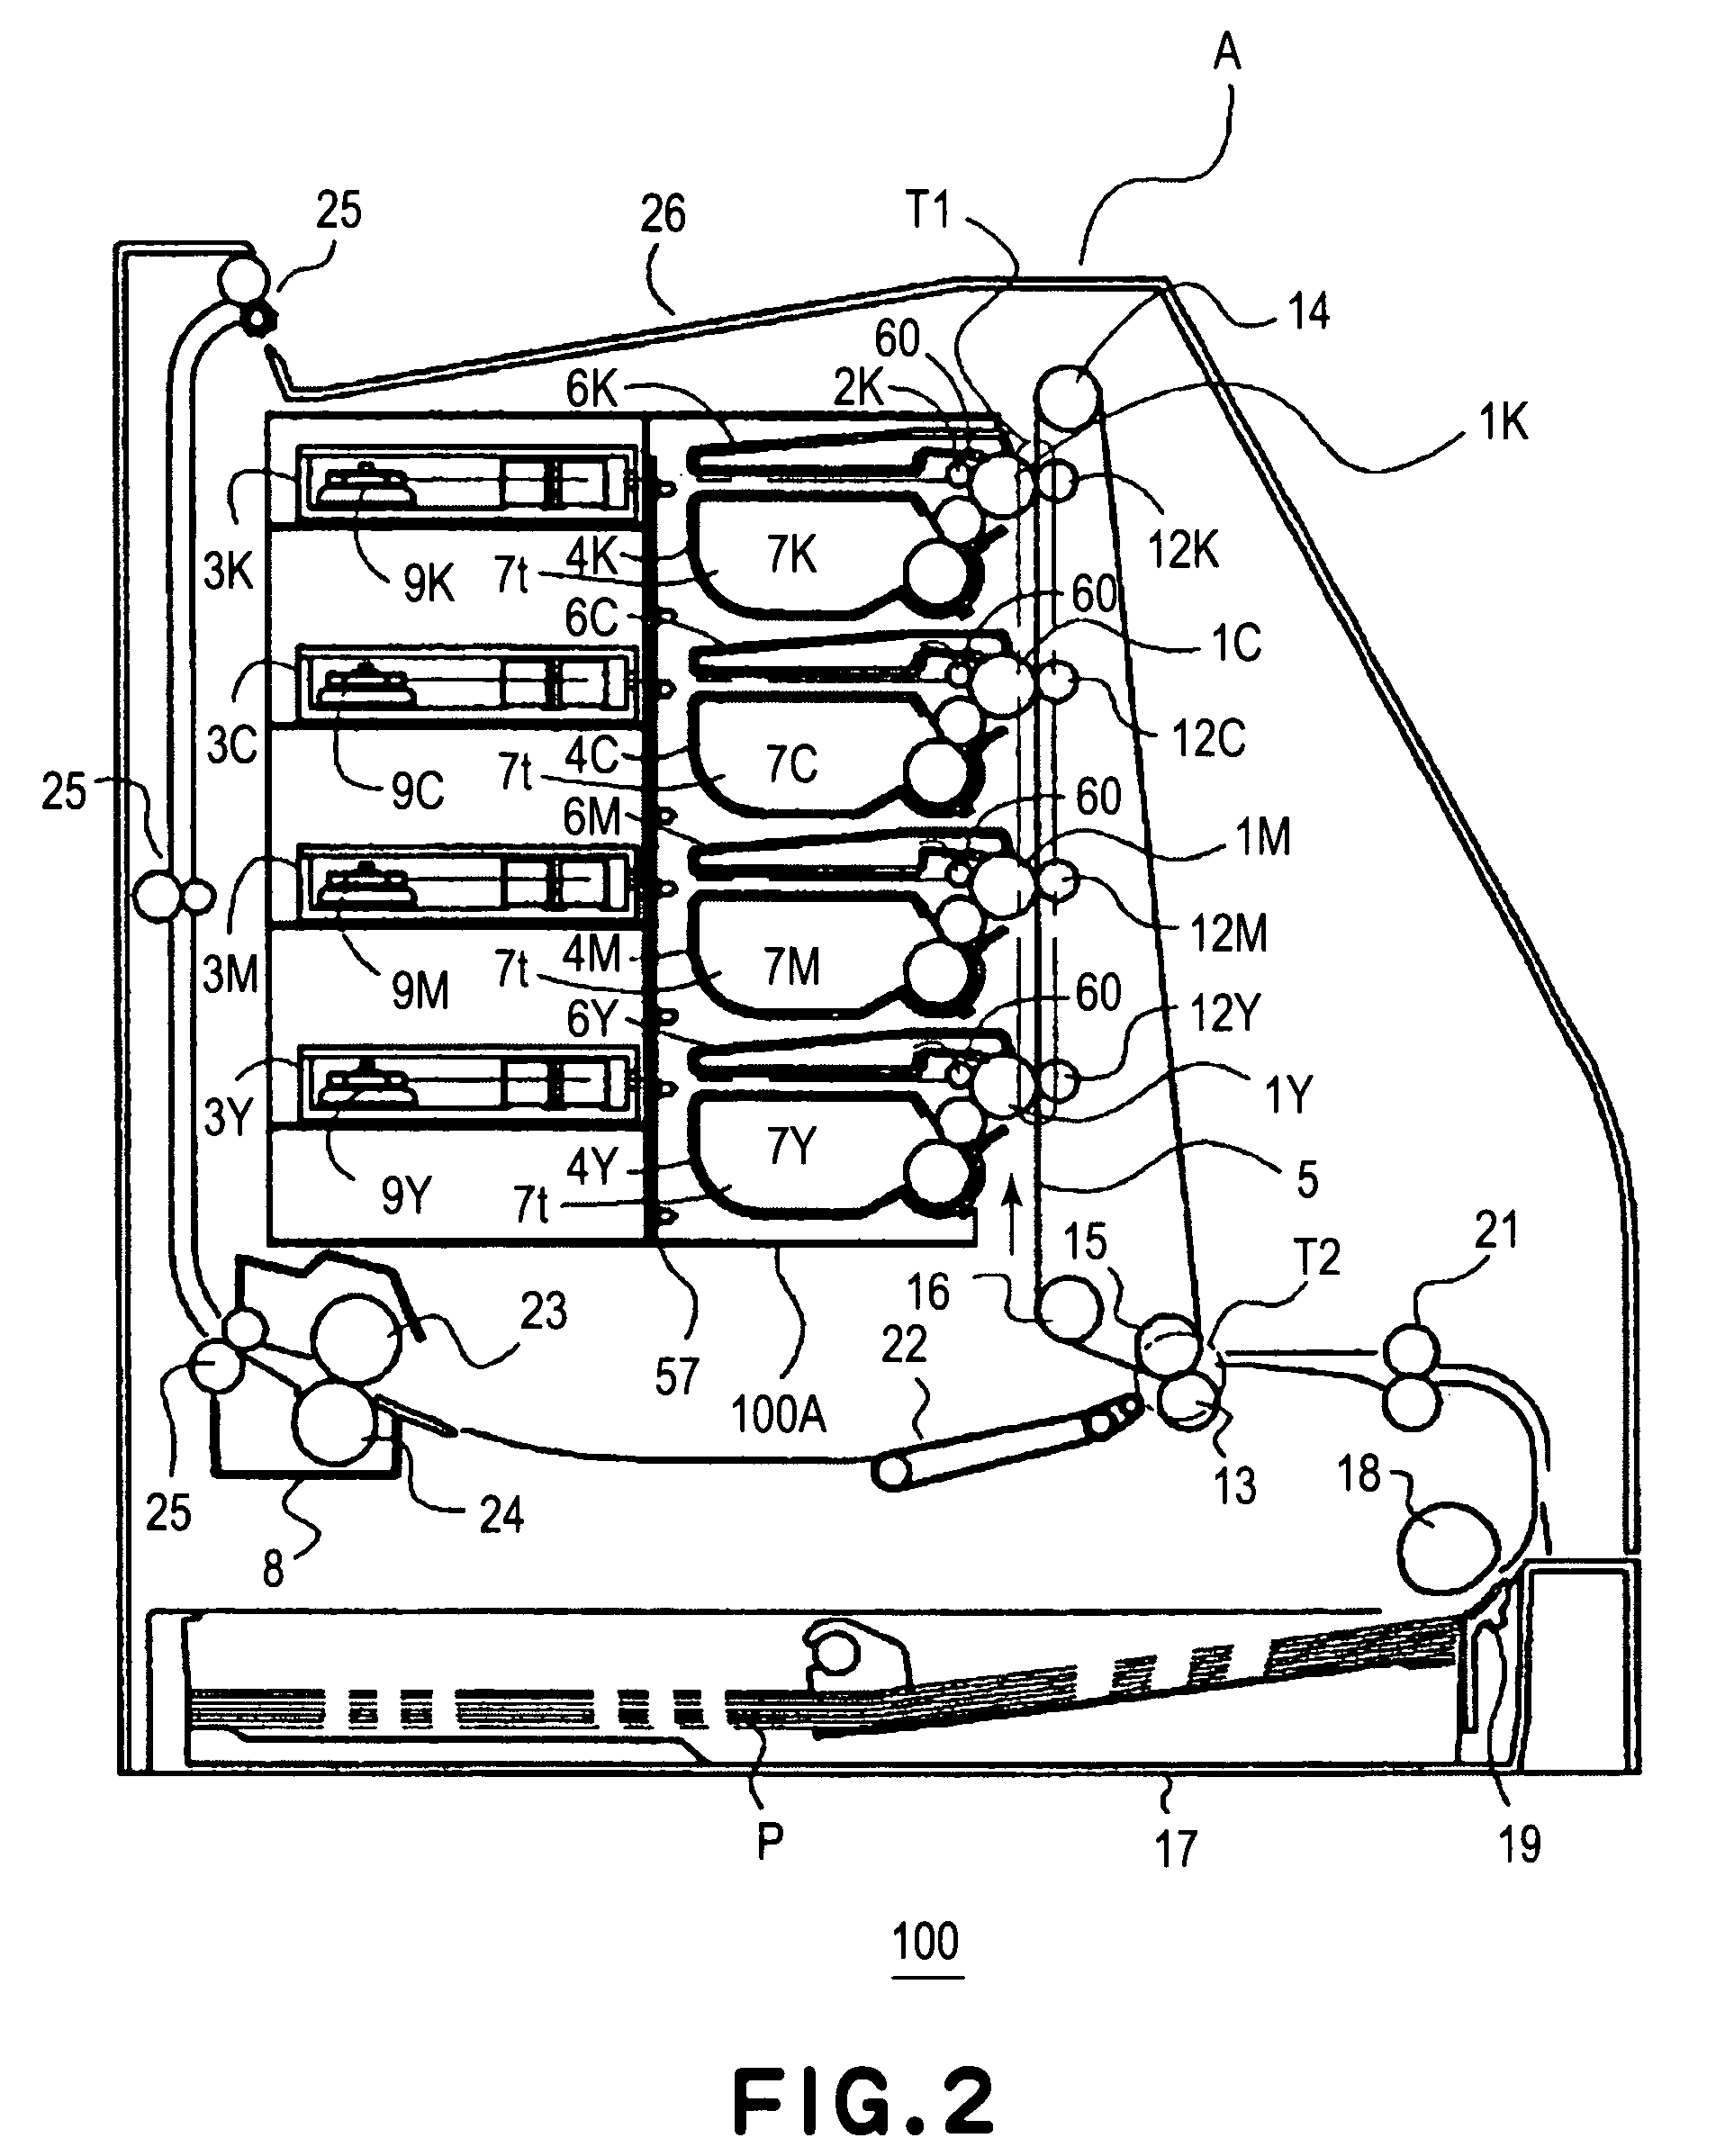 Process cartridge having light guides and memory member, and electrophotographic image forming apparatus to which such cartridge is mountable